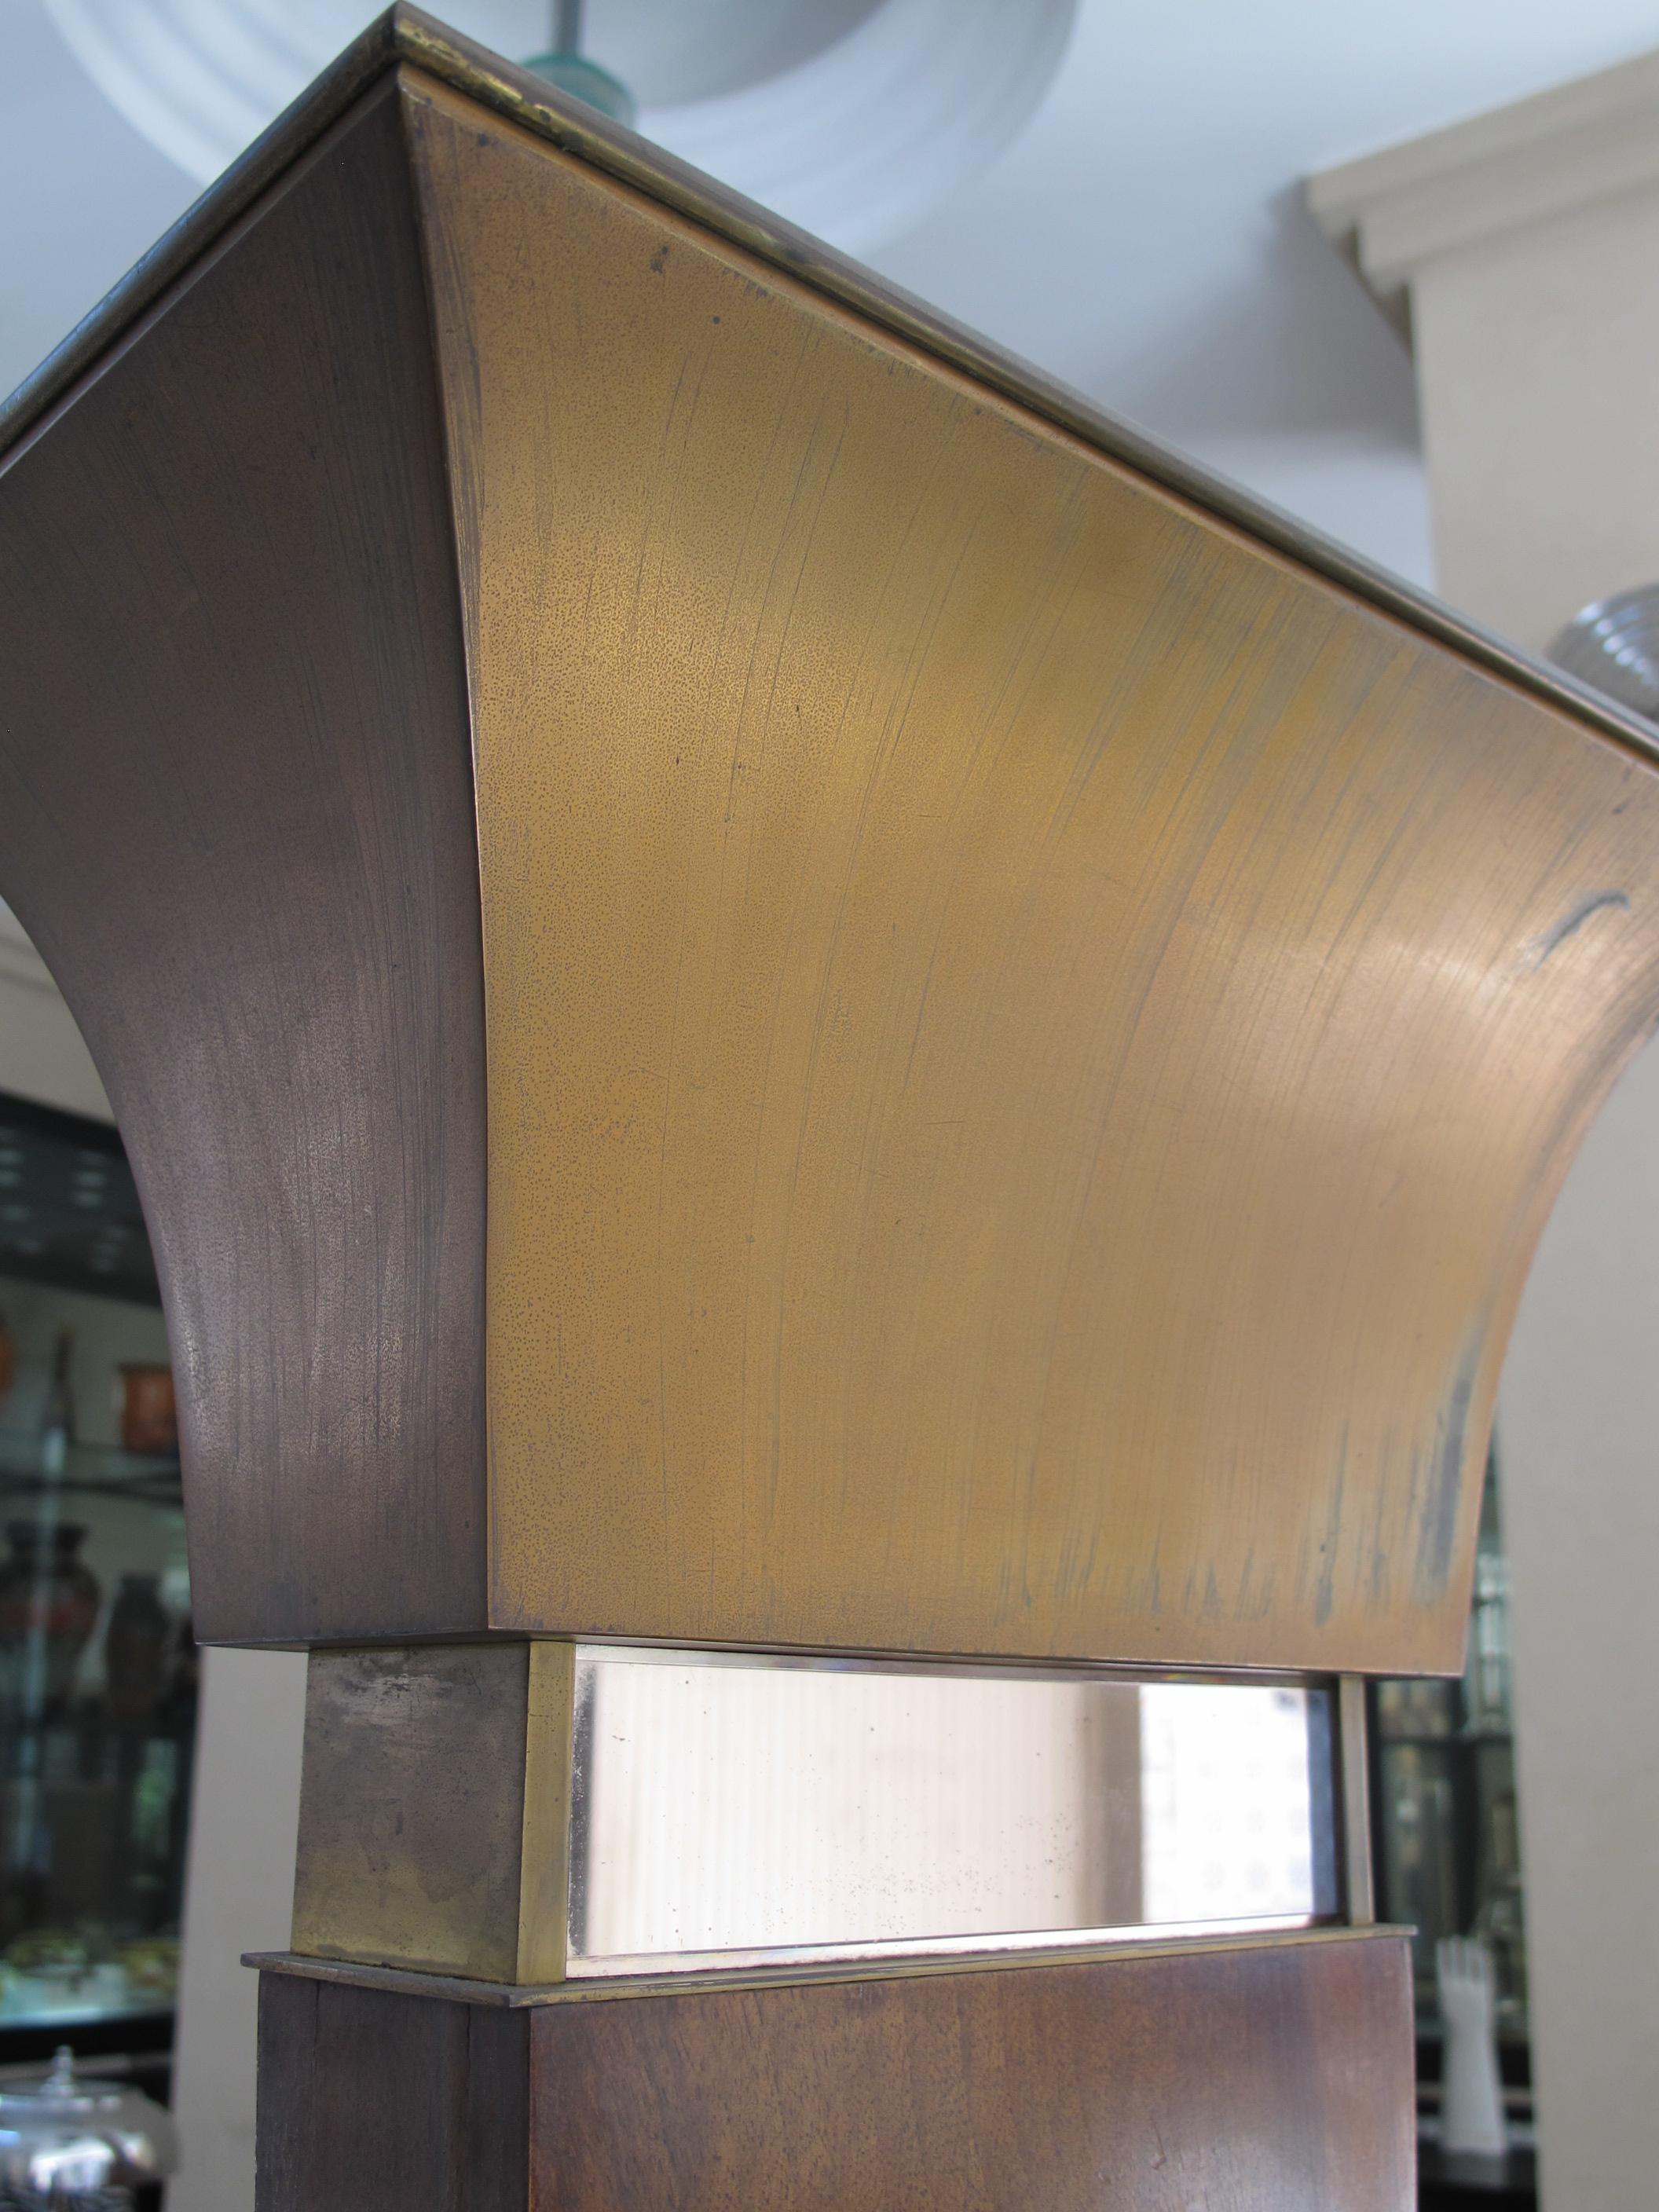 Floor lamp Art Deco

Materials: wood ,mirror, bronze
France
1930
You want to live in the golden years, those are the floor lamps that your project needs.
We have specialized in the sale of Art Deco and Art Nouveau styles since 1982.
Pushing the